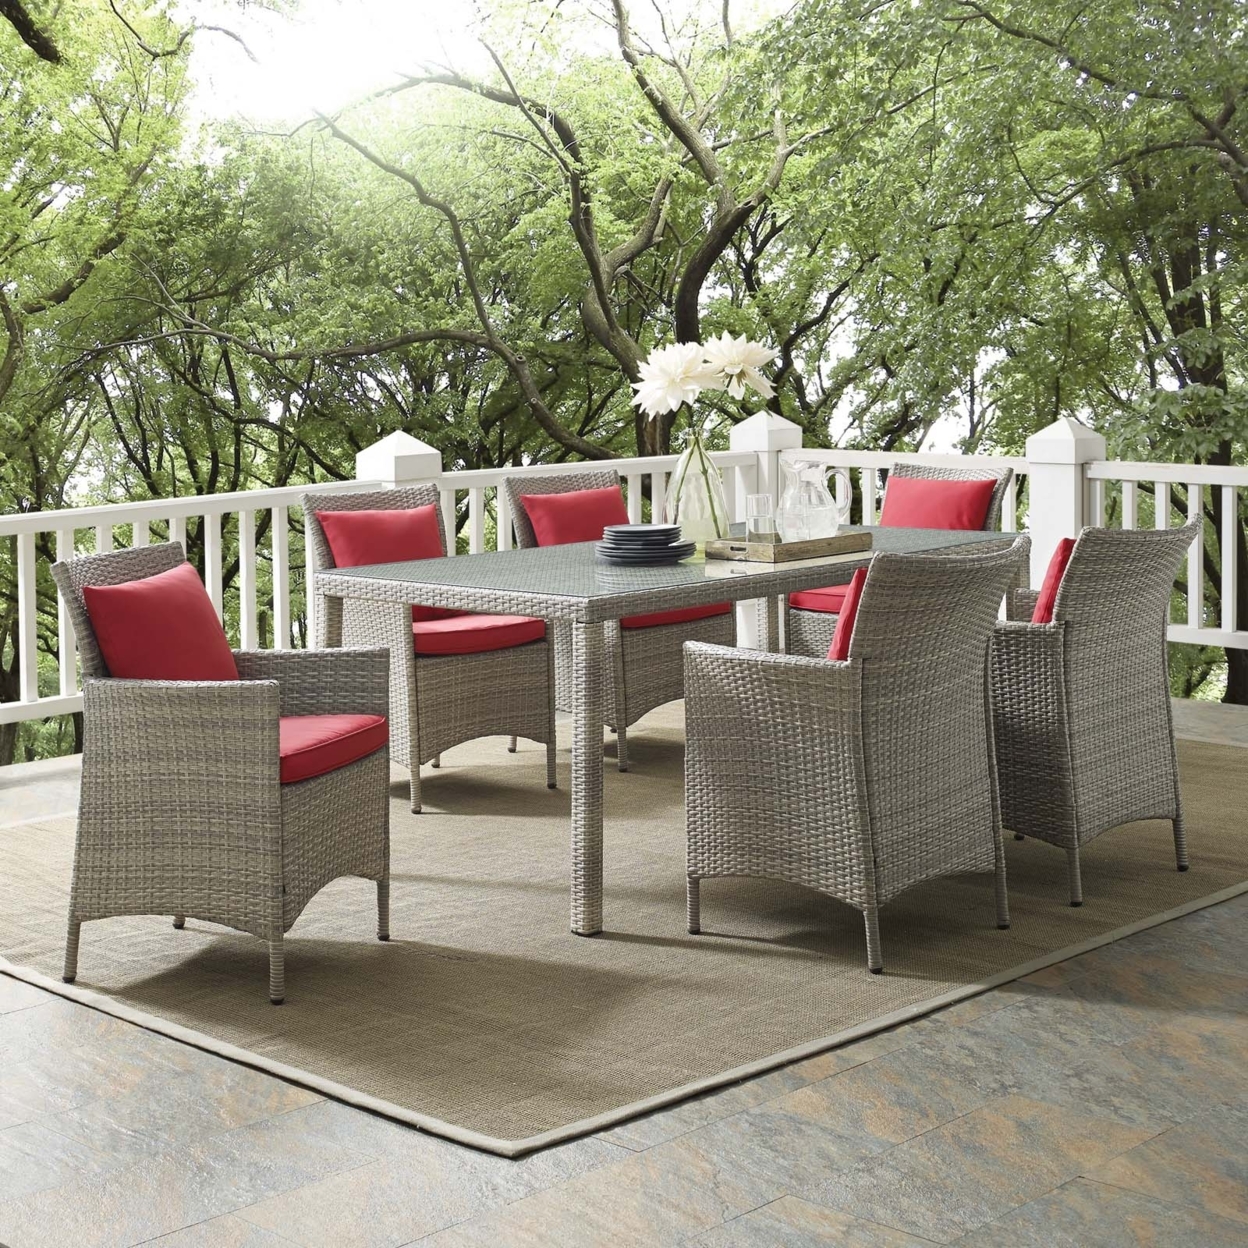 Modway Conduit 7-Piece Modern Rattan Outdoor Dining Set in Light Gray/Red - image 1 of 7